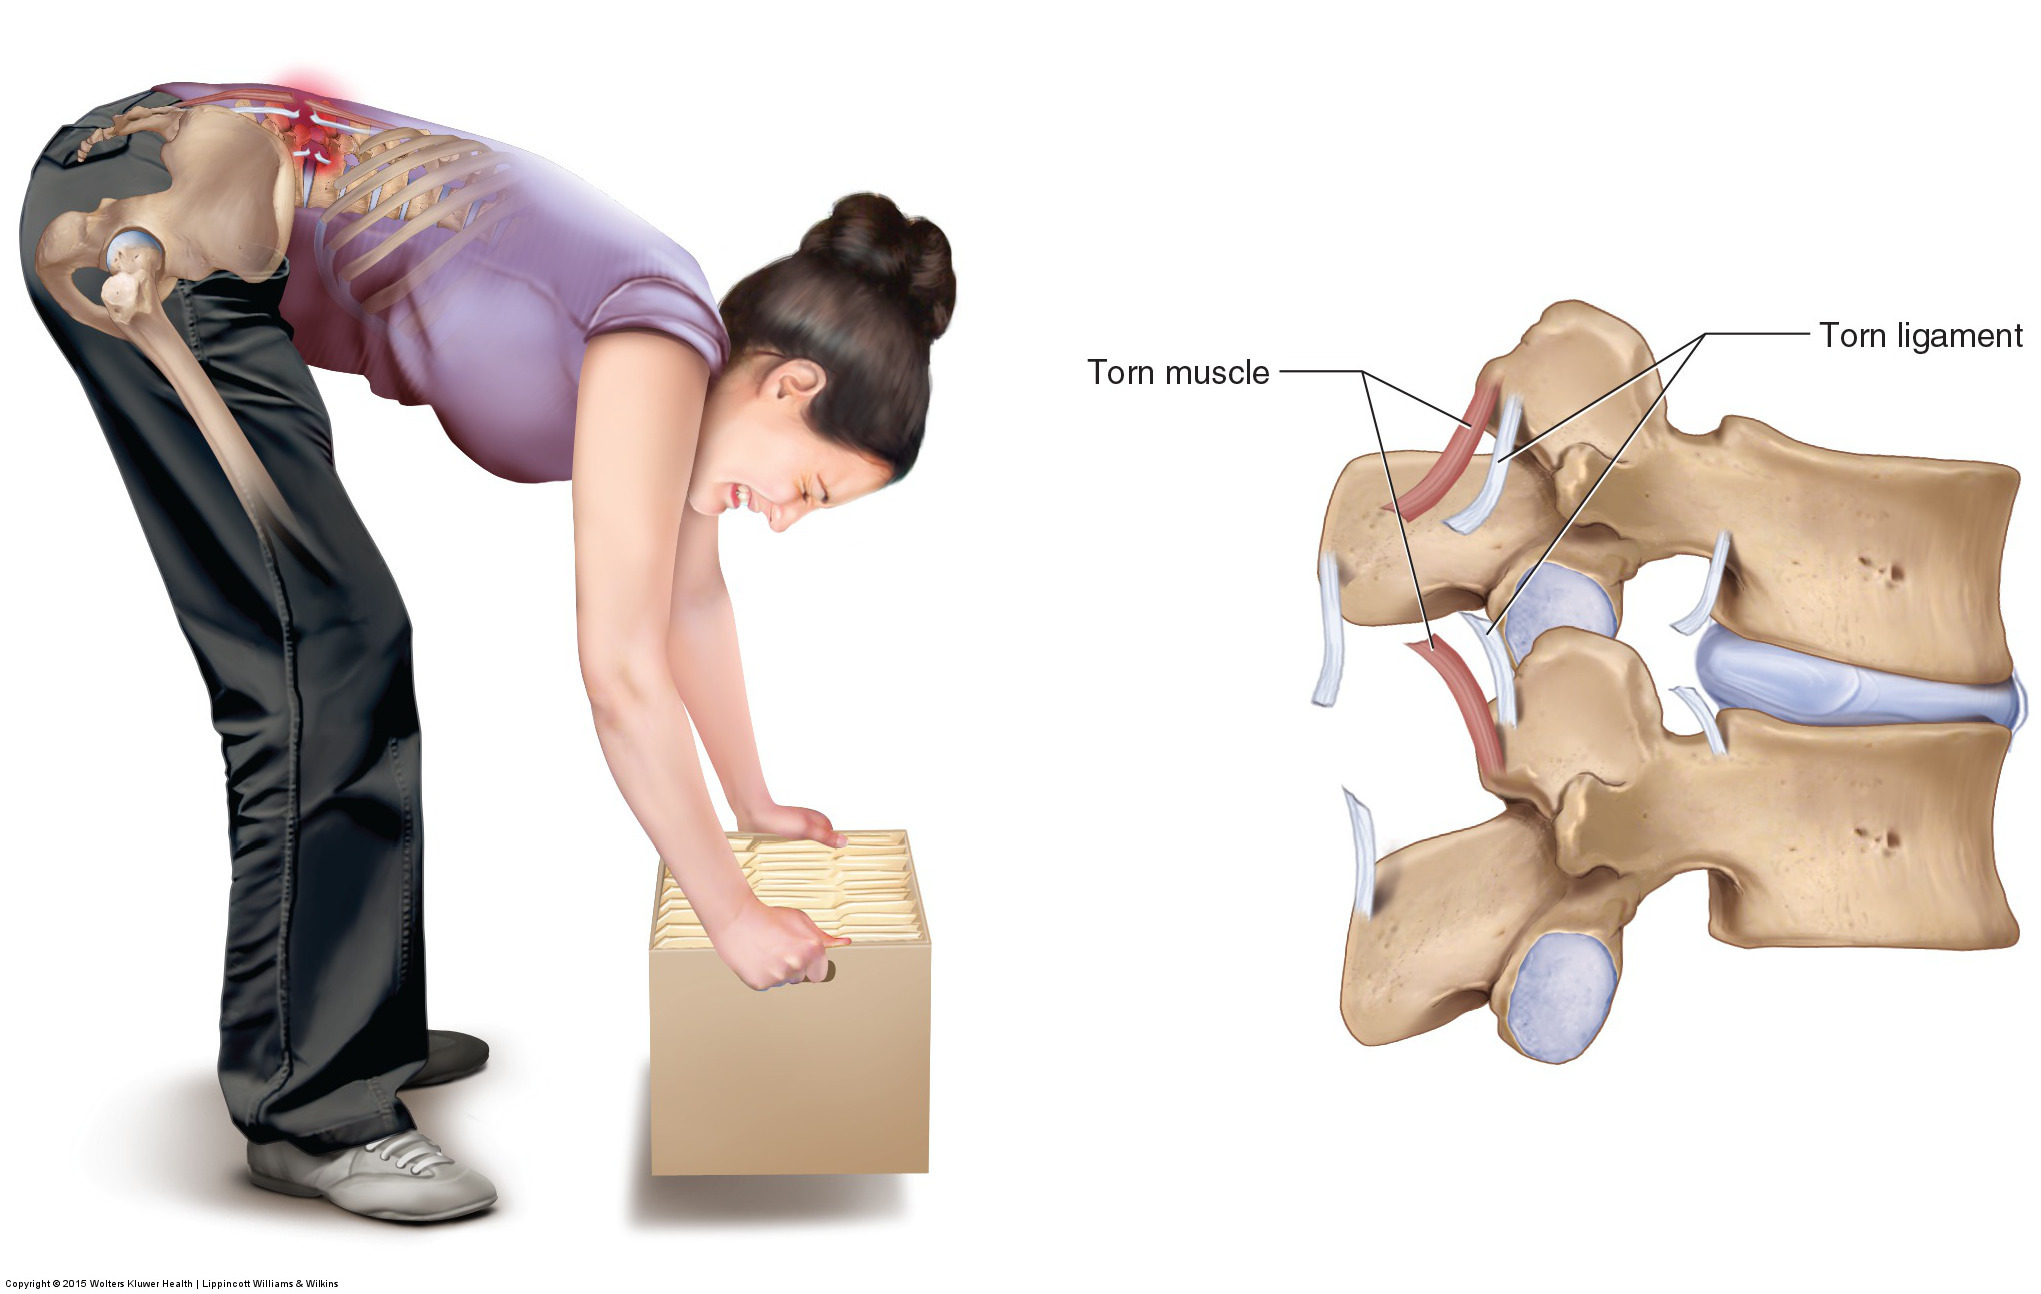 What are the causes of a low back sprain and low back strain?